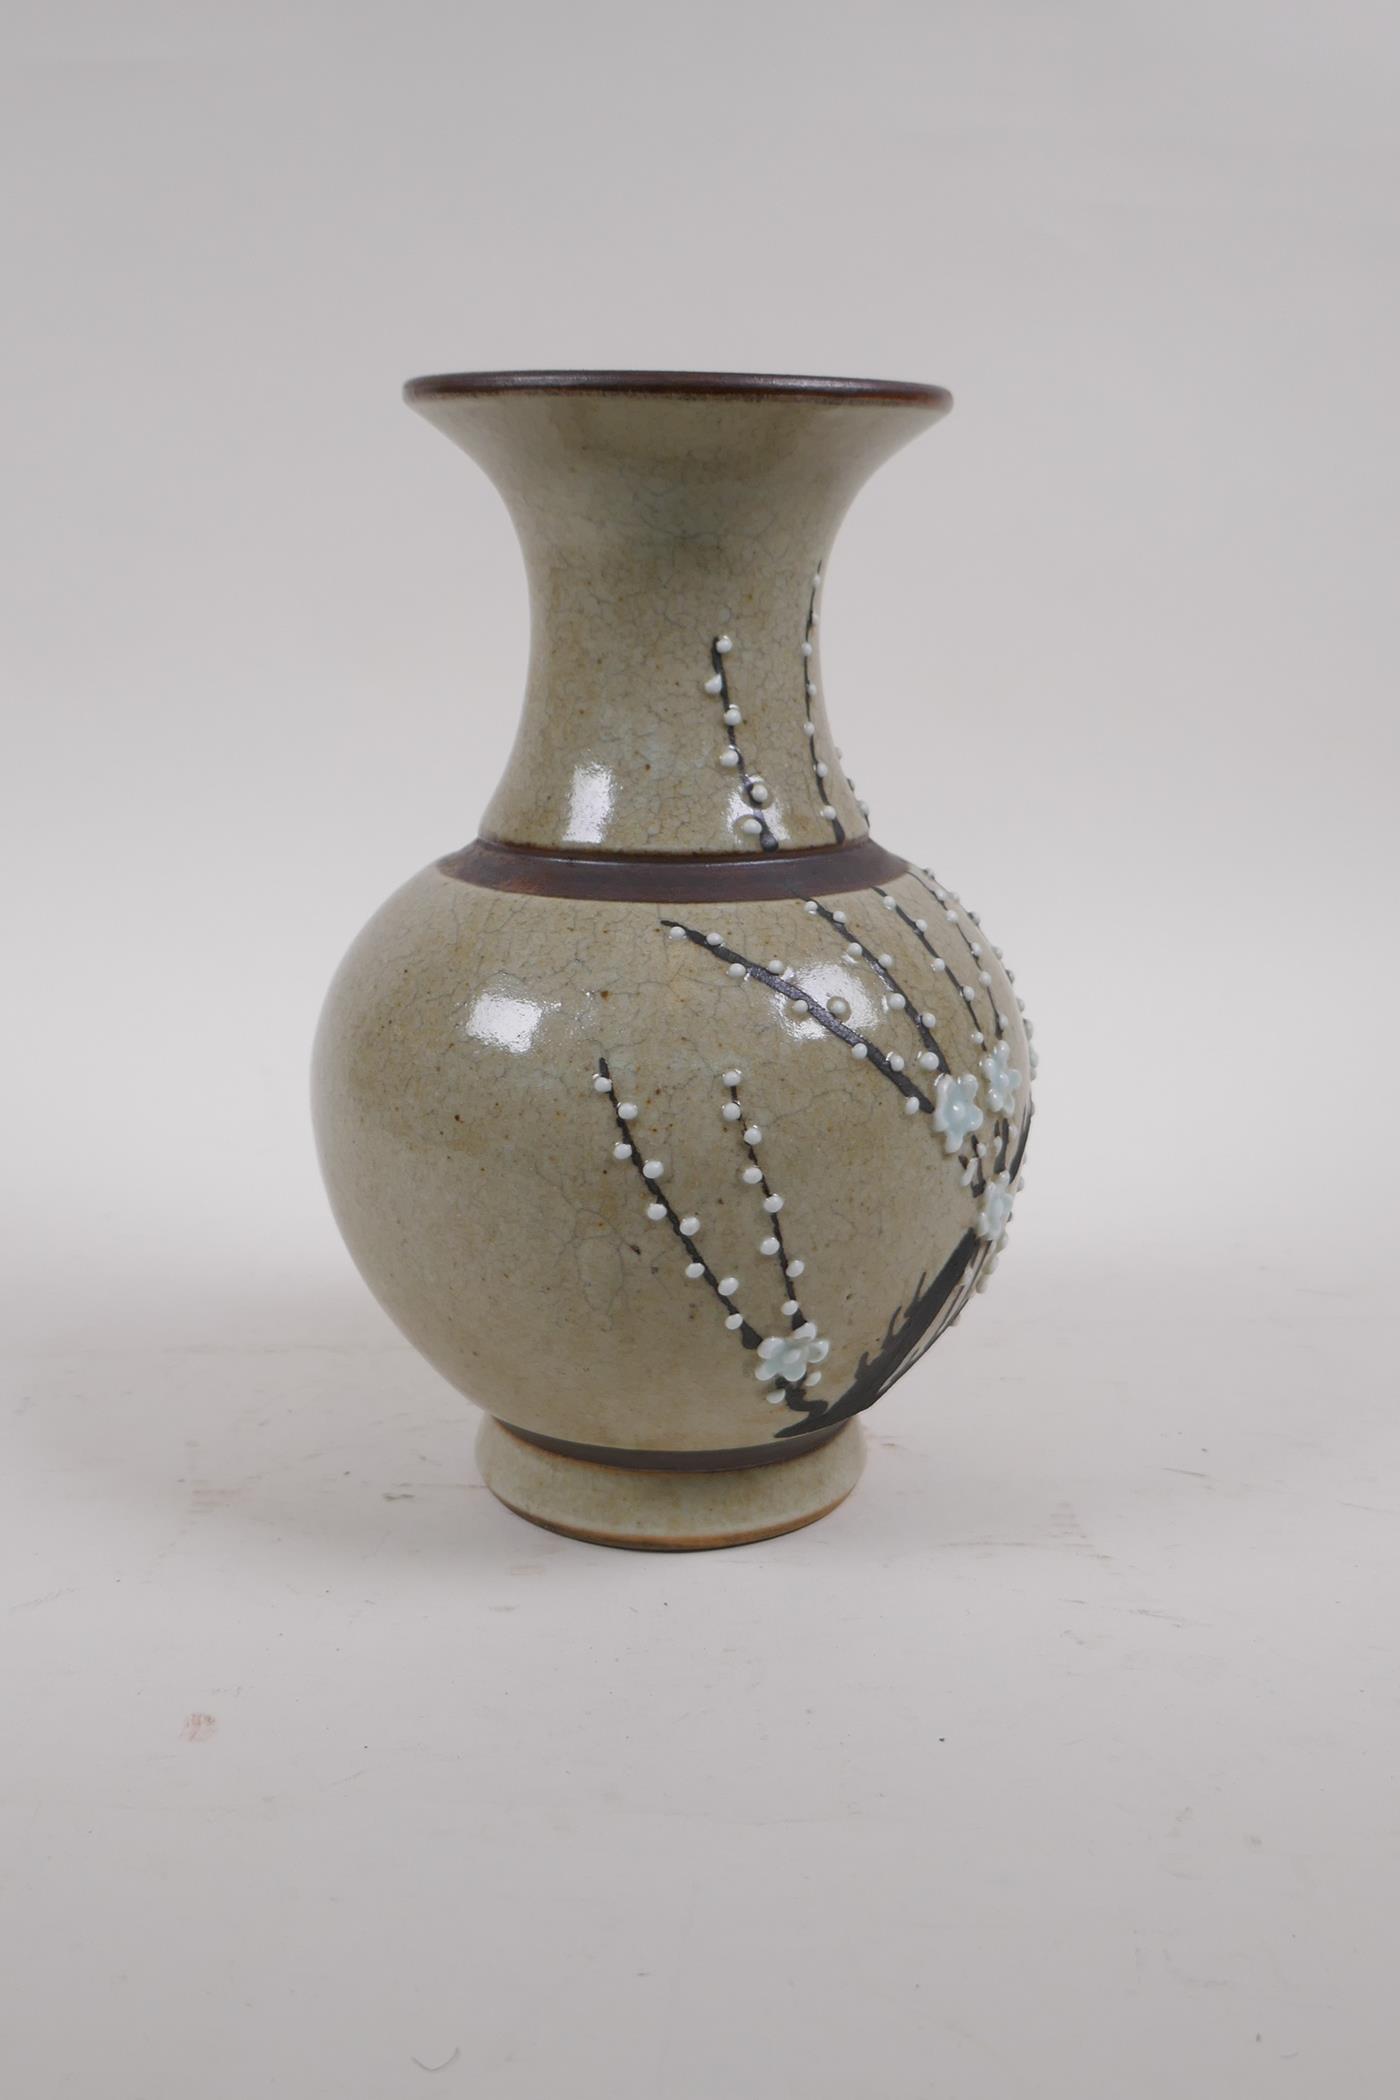 A Chinese celadon glazed porcelain vase with bronze style bands and prunus blossom decoration, - Image 4 of 5